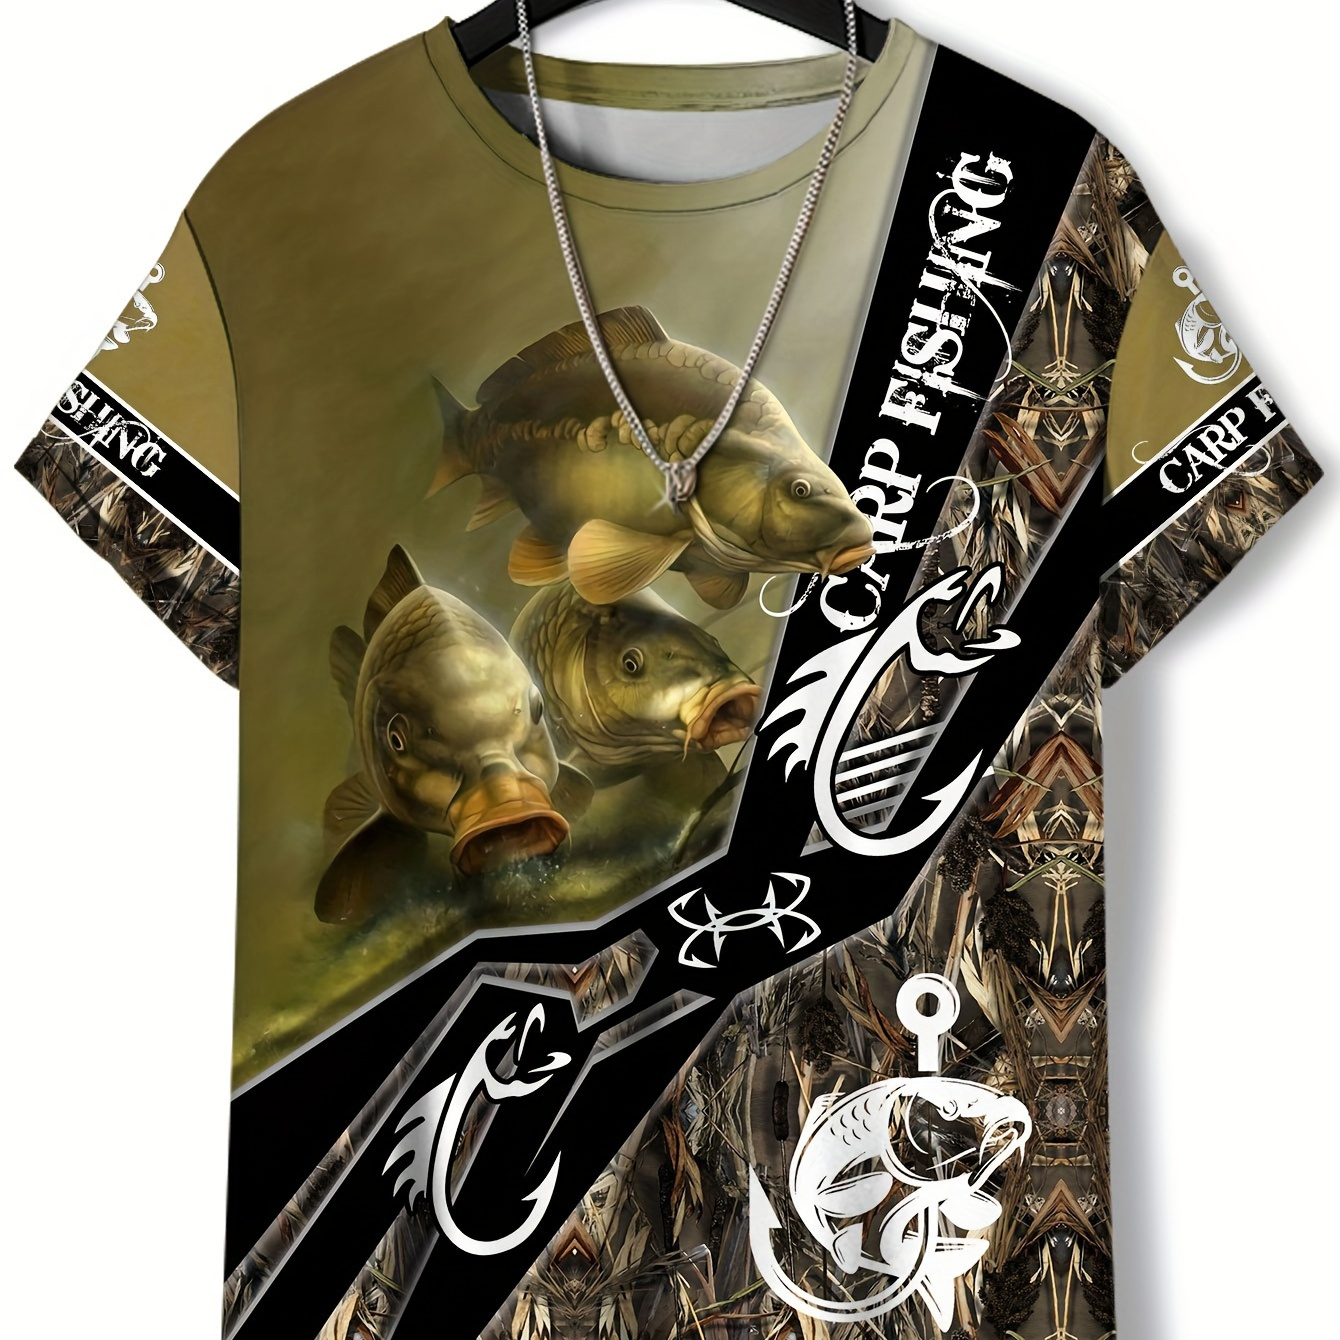 

Men's 3d Digital Fishing Theme Pattern And Letter Print Crew Neck And Short Sleeve T-shirt, Chic And Stylish Tops For Summer Fishing Wear And Outdoors Activities